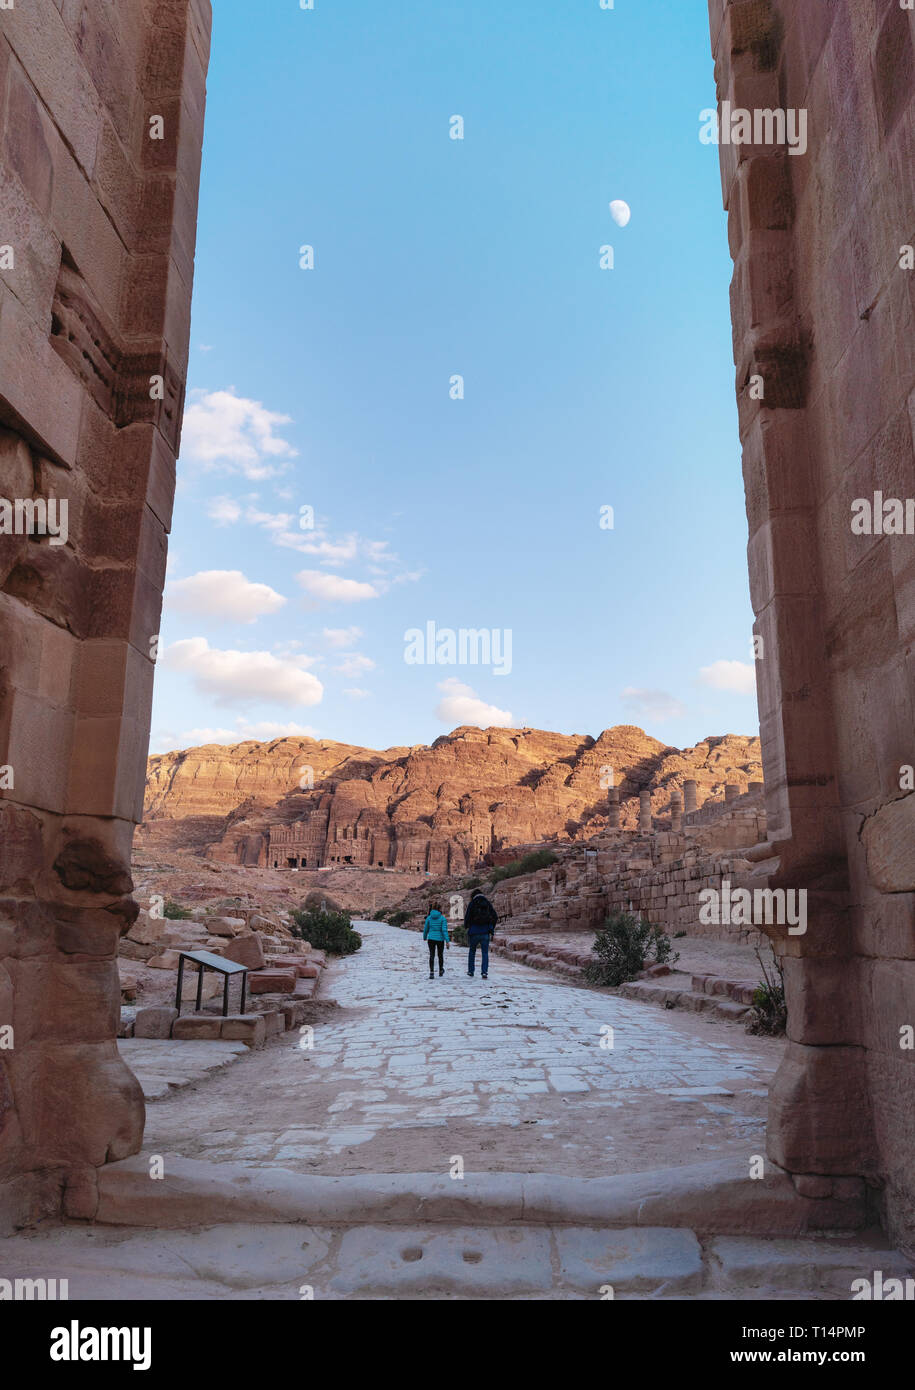 Travelling in Petra, the rose city in Jordan. Couple walking through ancient arch in Amman, Jordan, Middle East Stock Photo